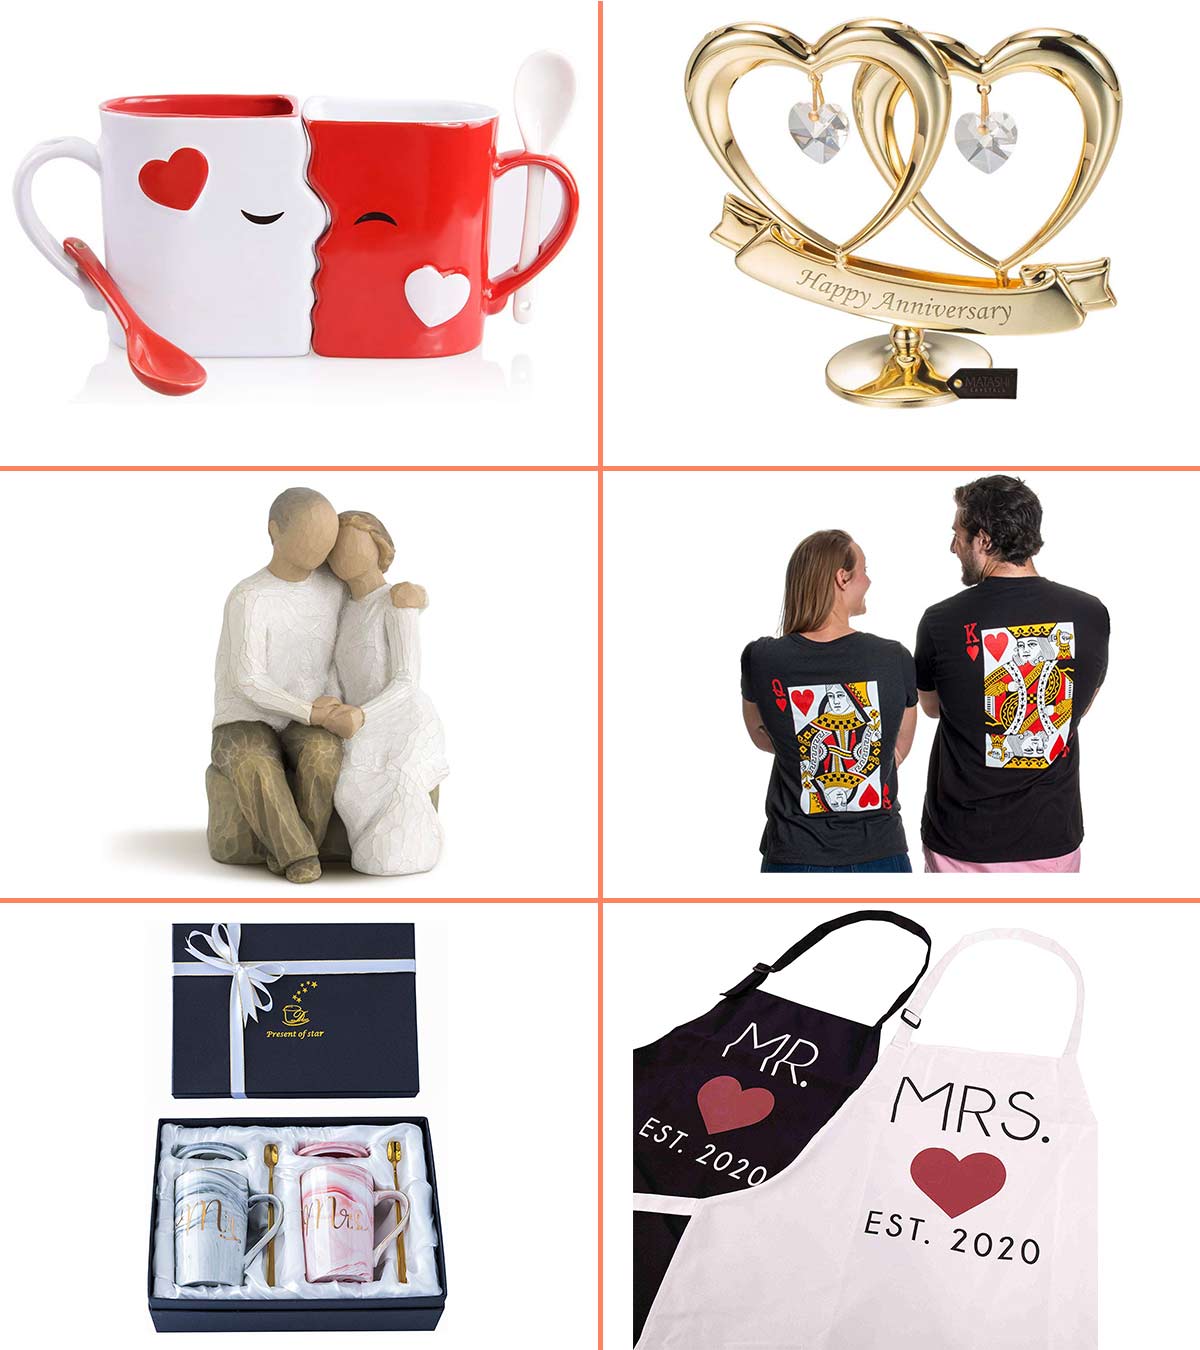 Anniversary Gifts for Young Couples | Gifts for Couples - IGP.com-cheohanoi.vn